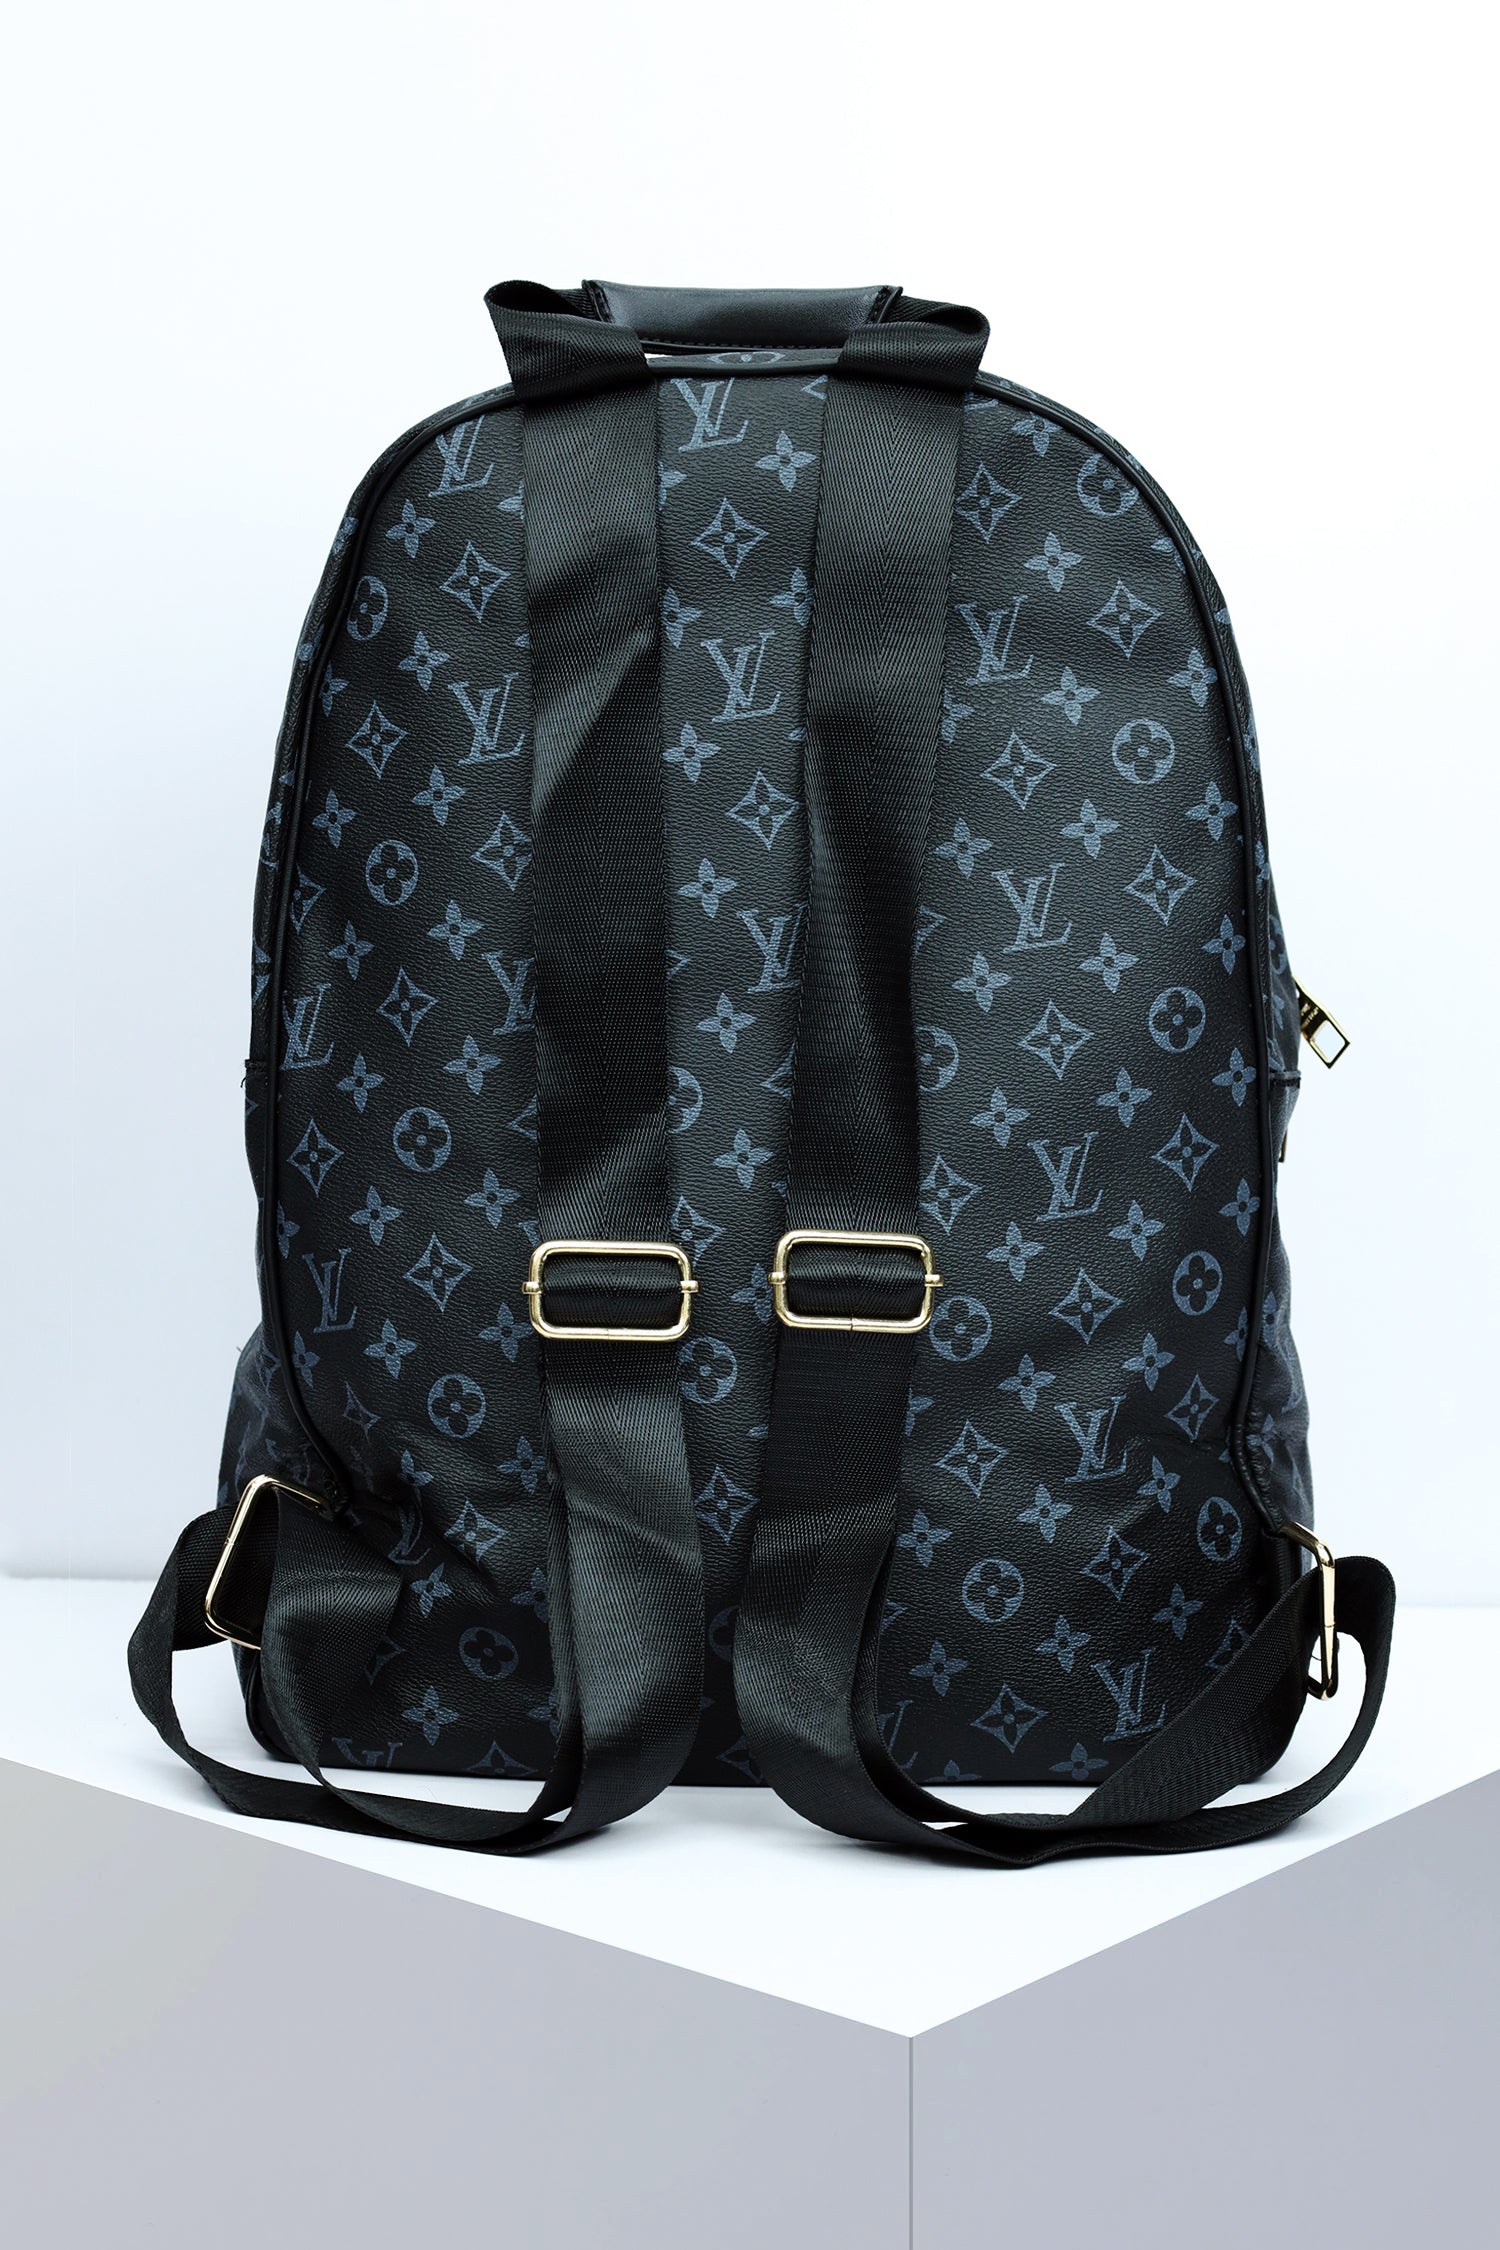 Lus Vtn Textured PU Leather Backpack in Black